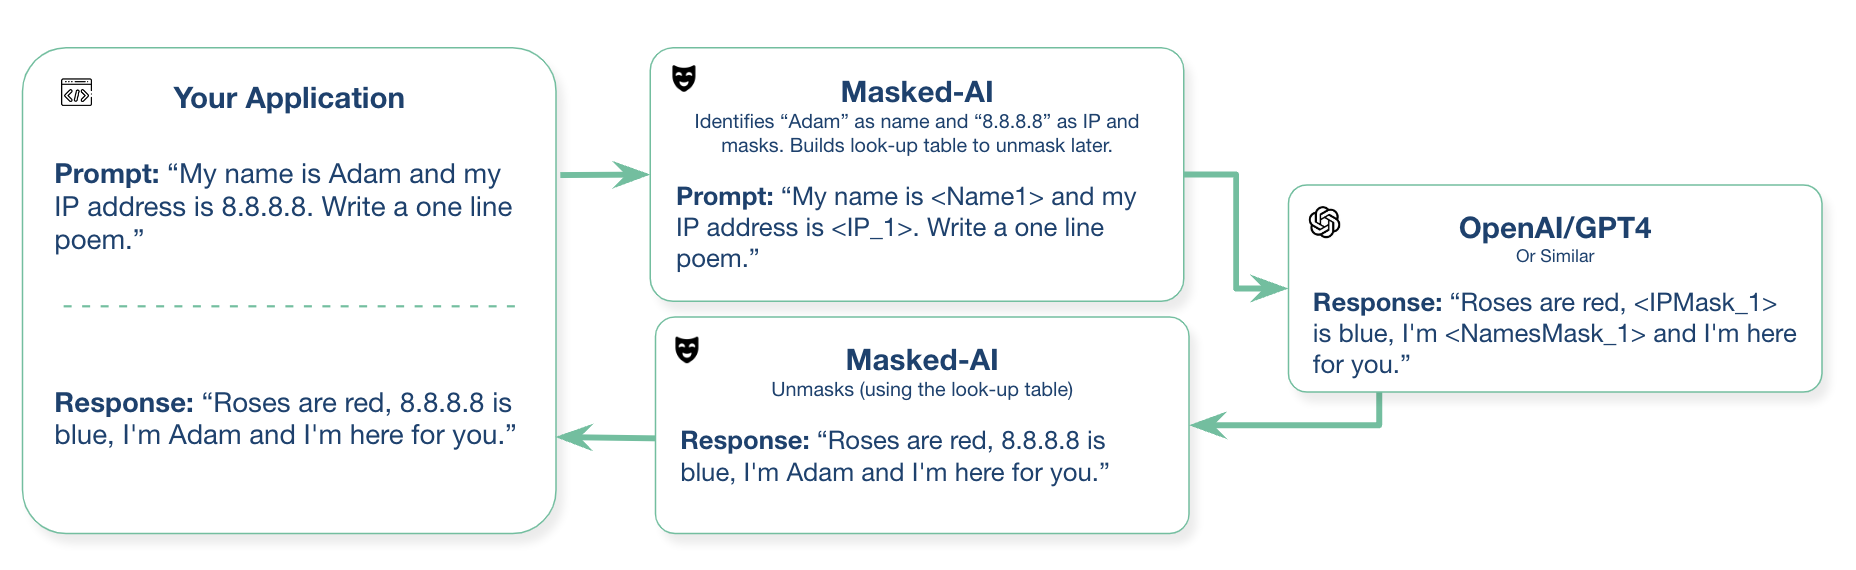 Introducing Cado's open source tool, Masked-AI, which allows users to leverage OpenAI/GPT4 more securely.